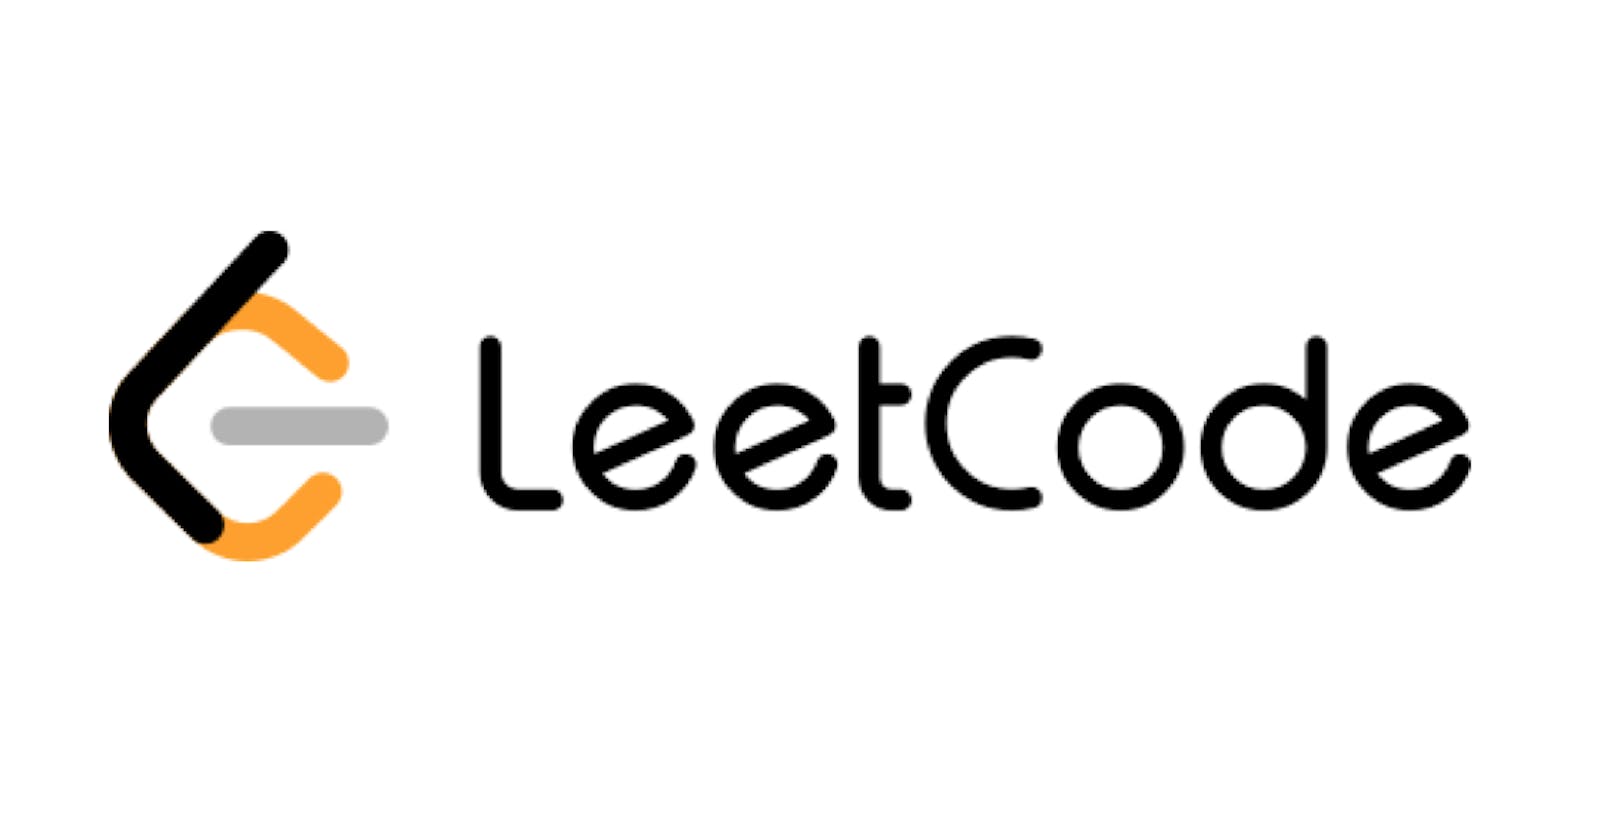 Leetcode 28 || Find the Index of the First Occurrence in a String